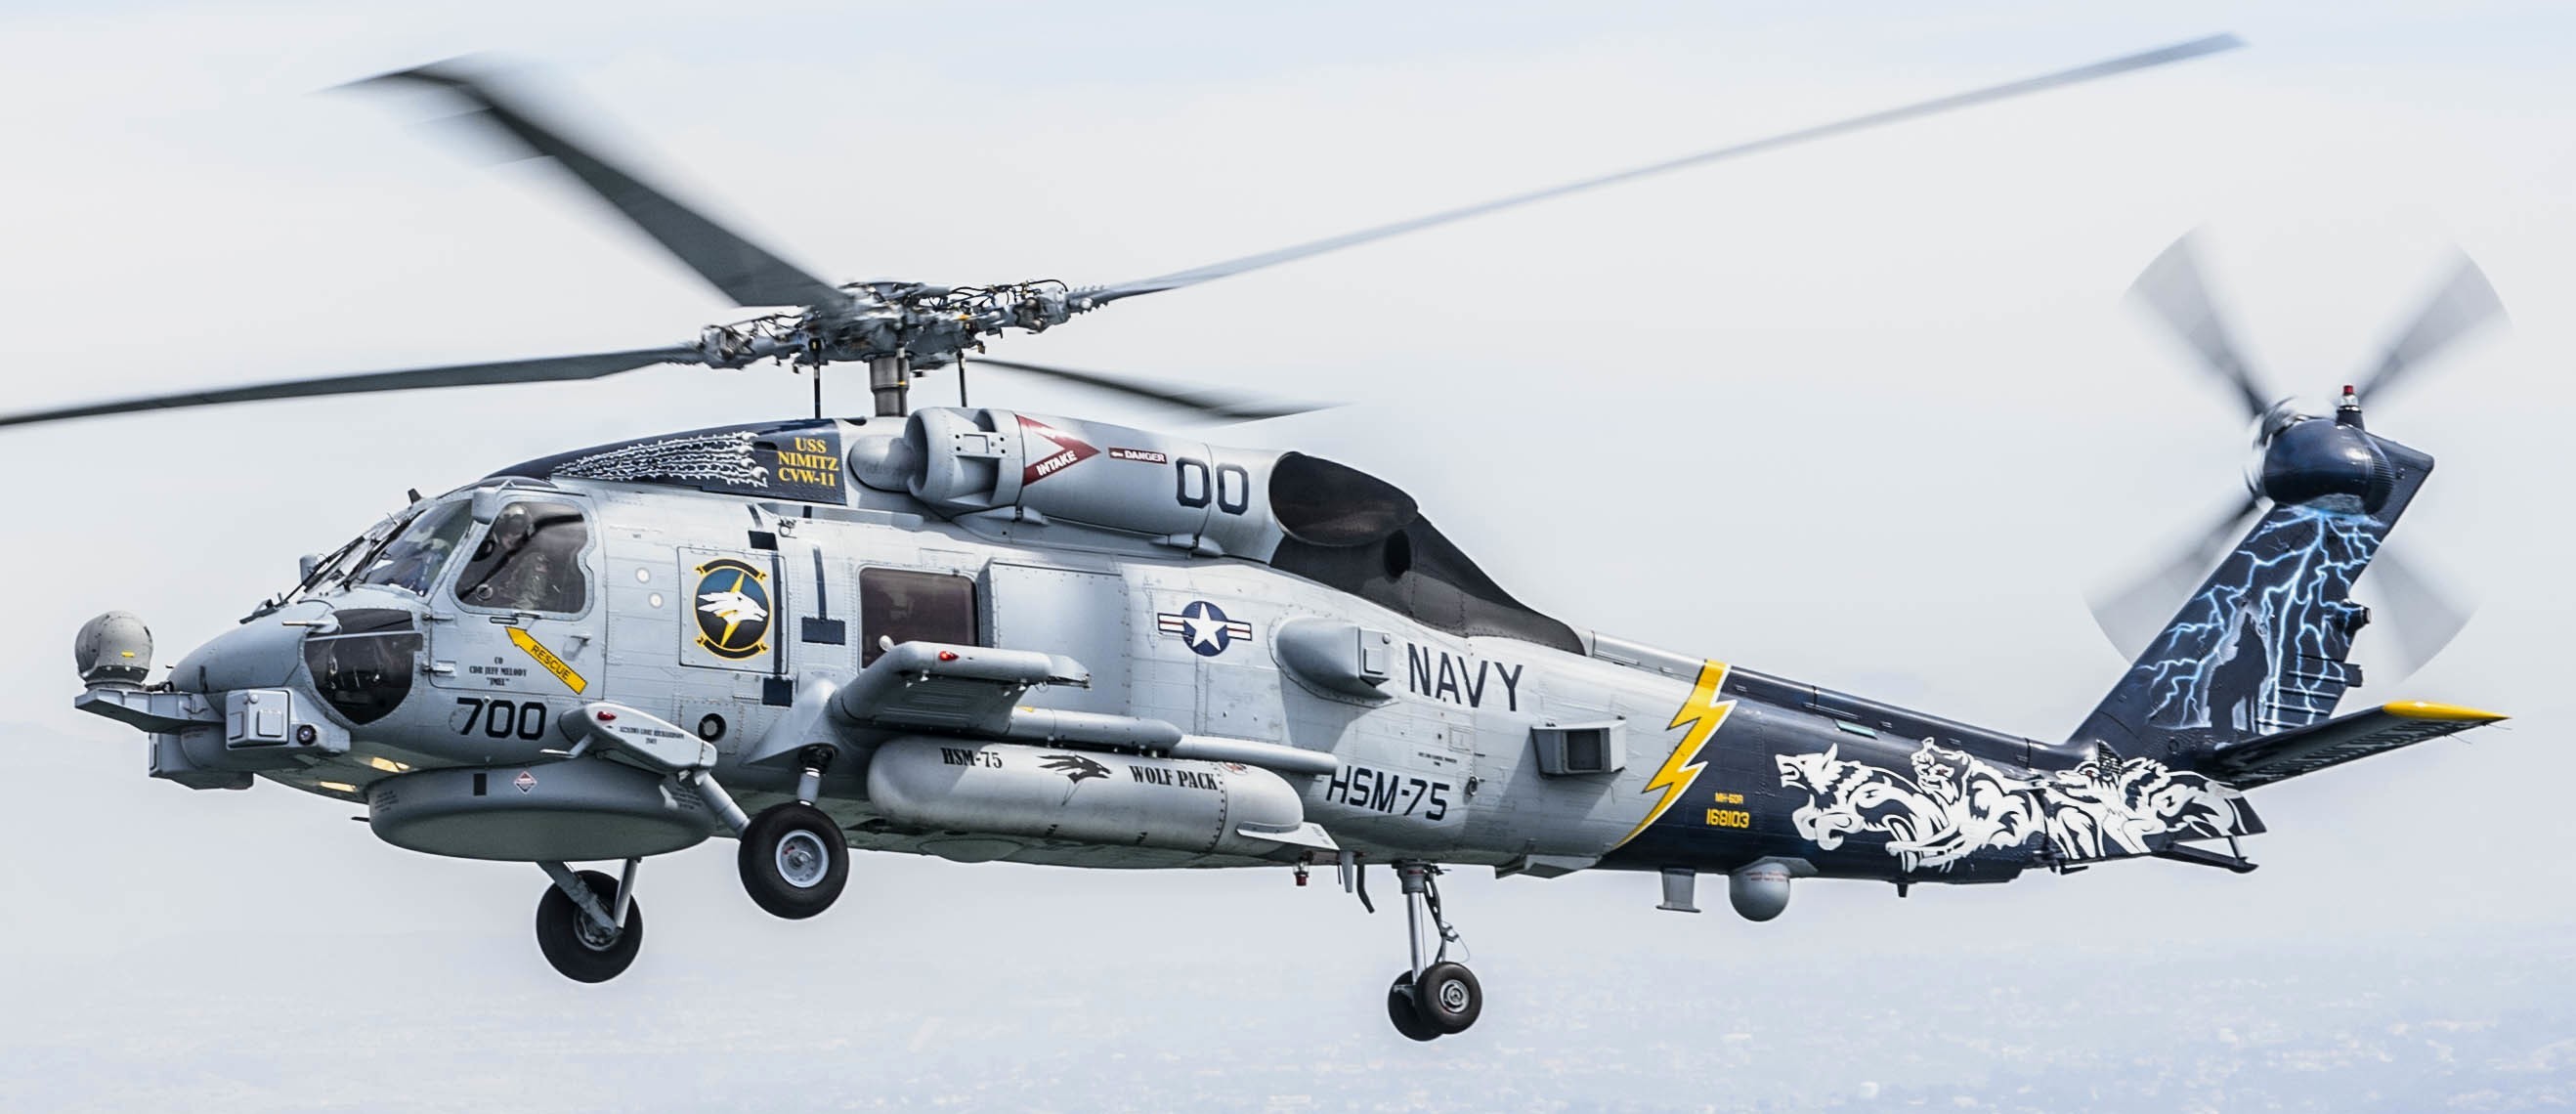 hsm-75 wolf pack helicopter maritime strike squadron mh-60r seahawk 42